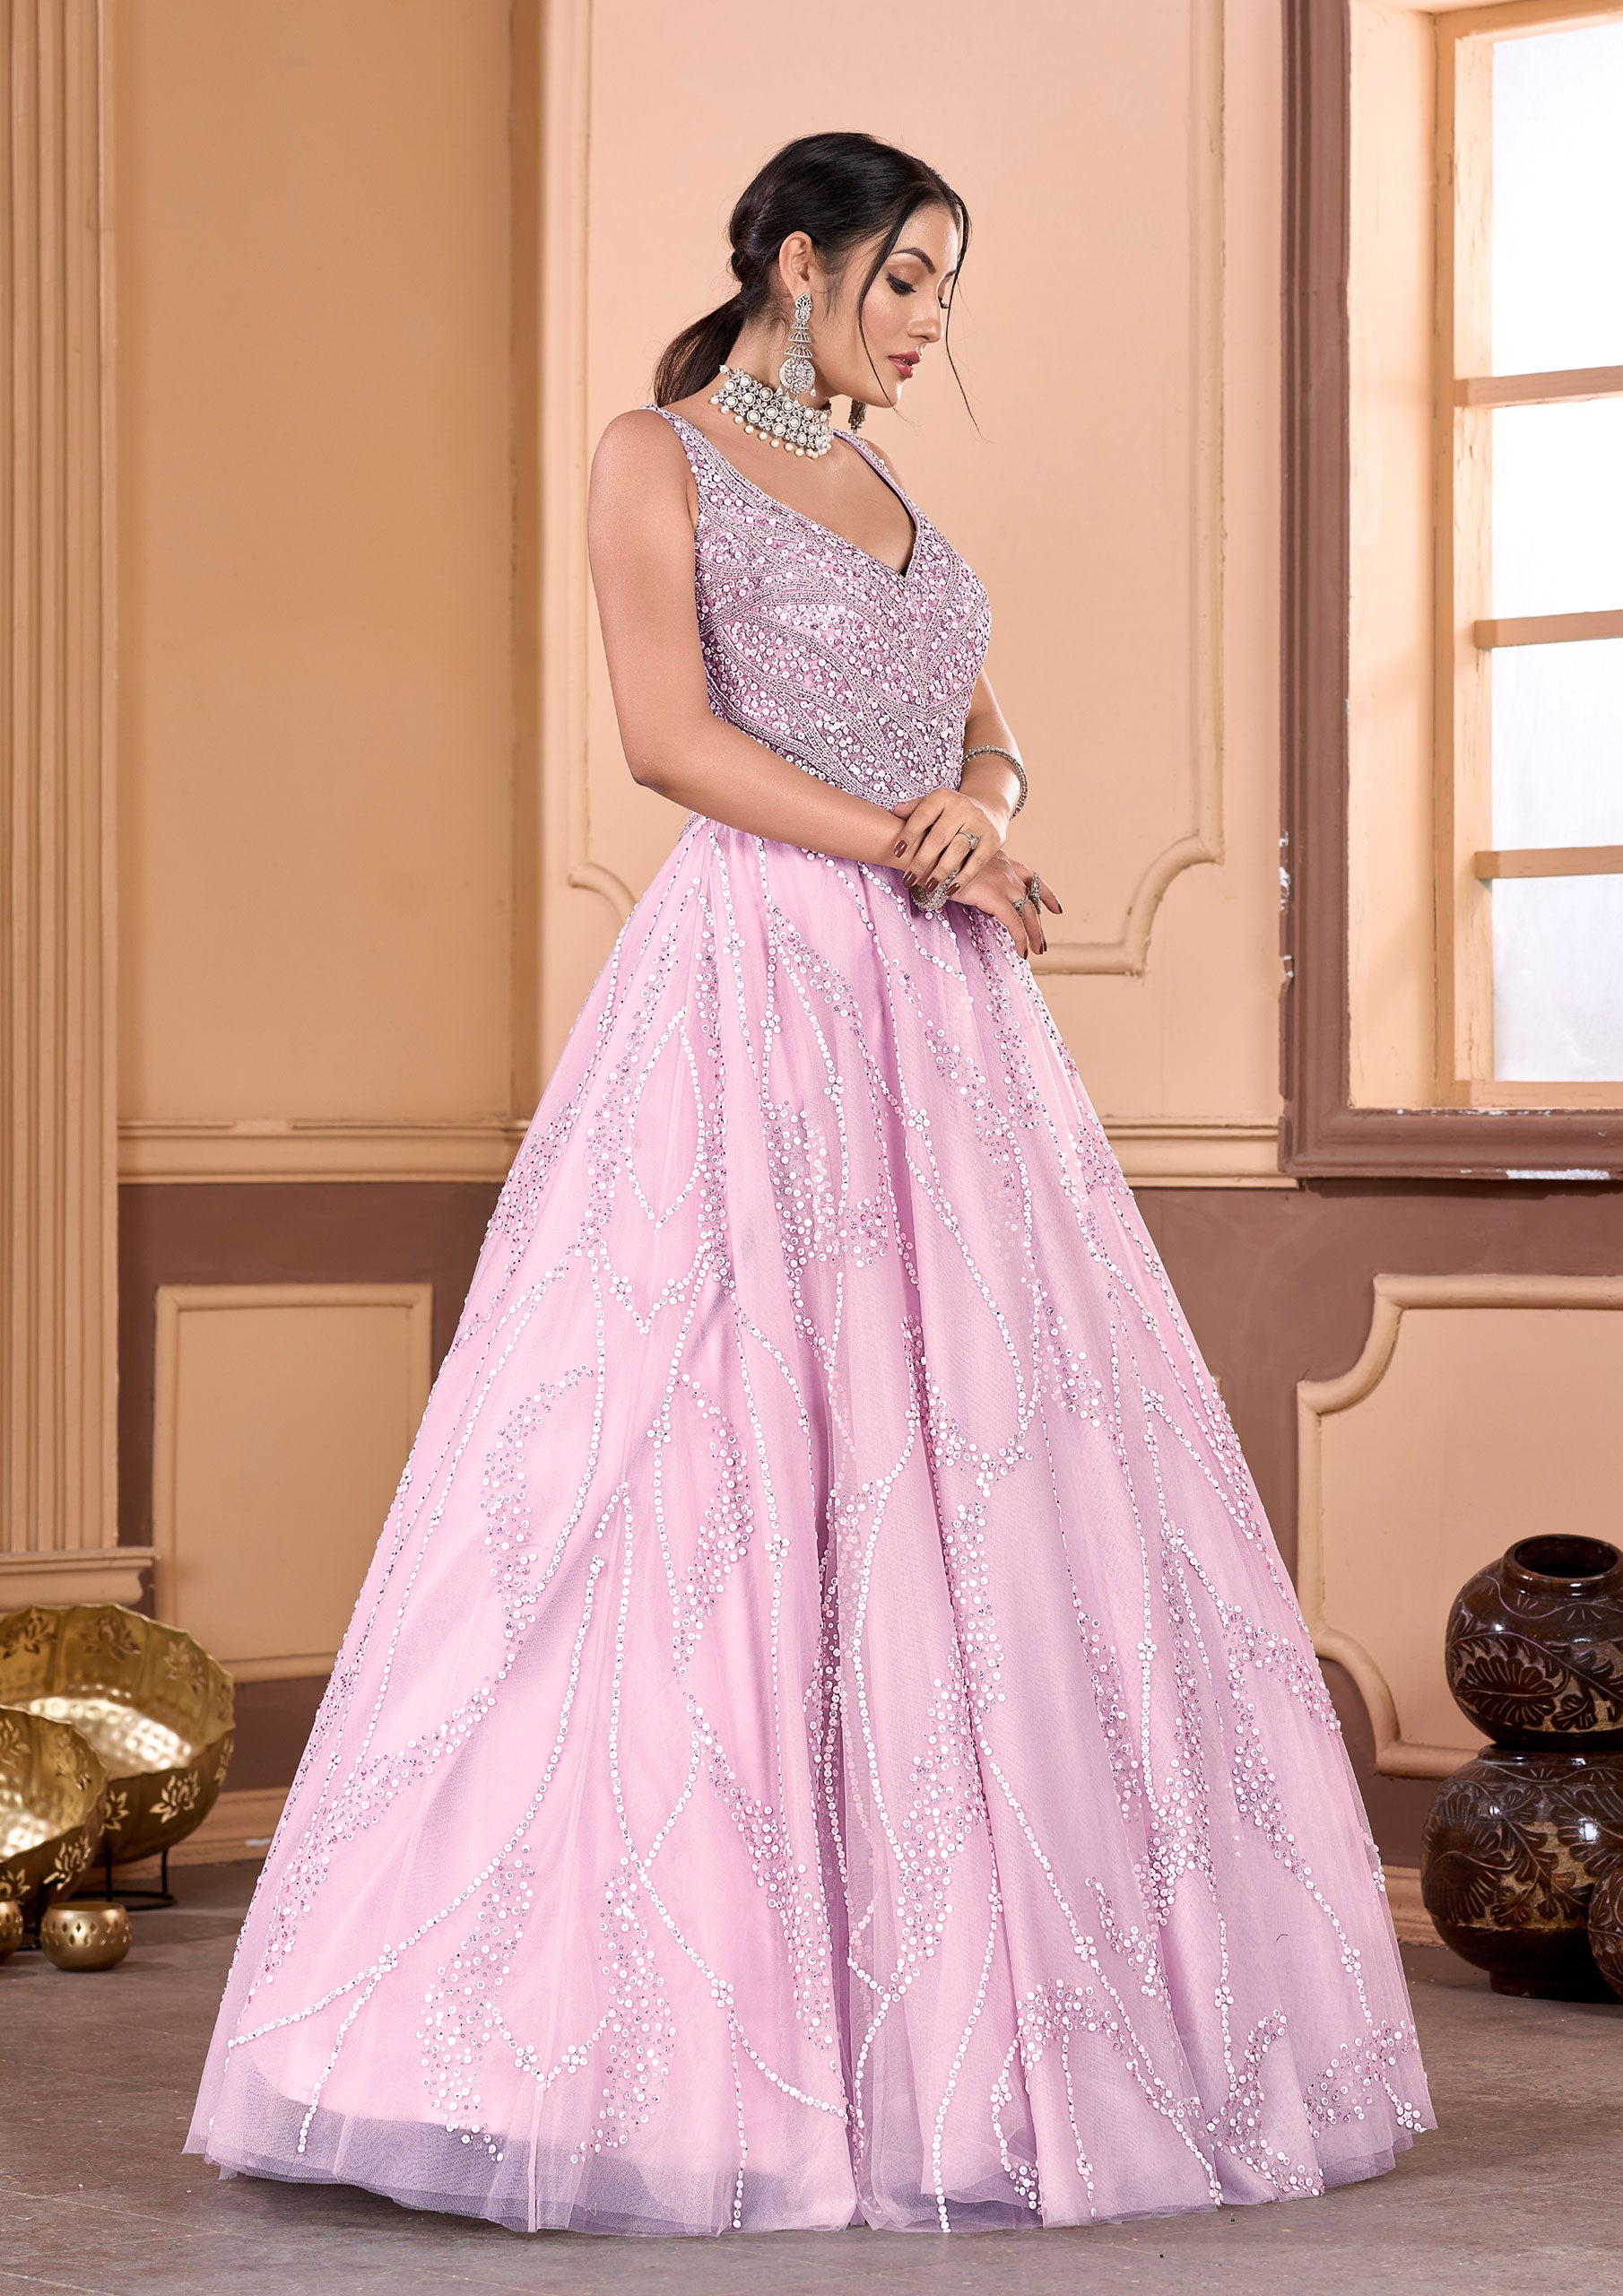 A woman in a pink gown and jewelry, looking elegant and sophisticated.